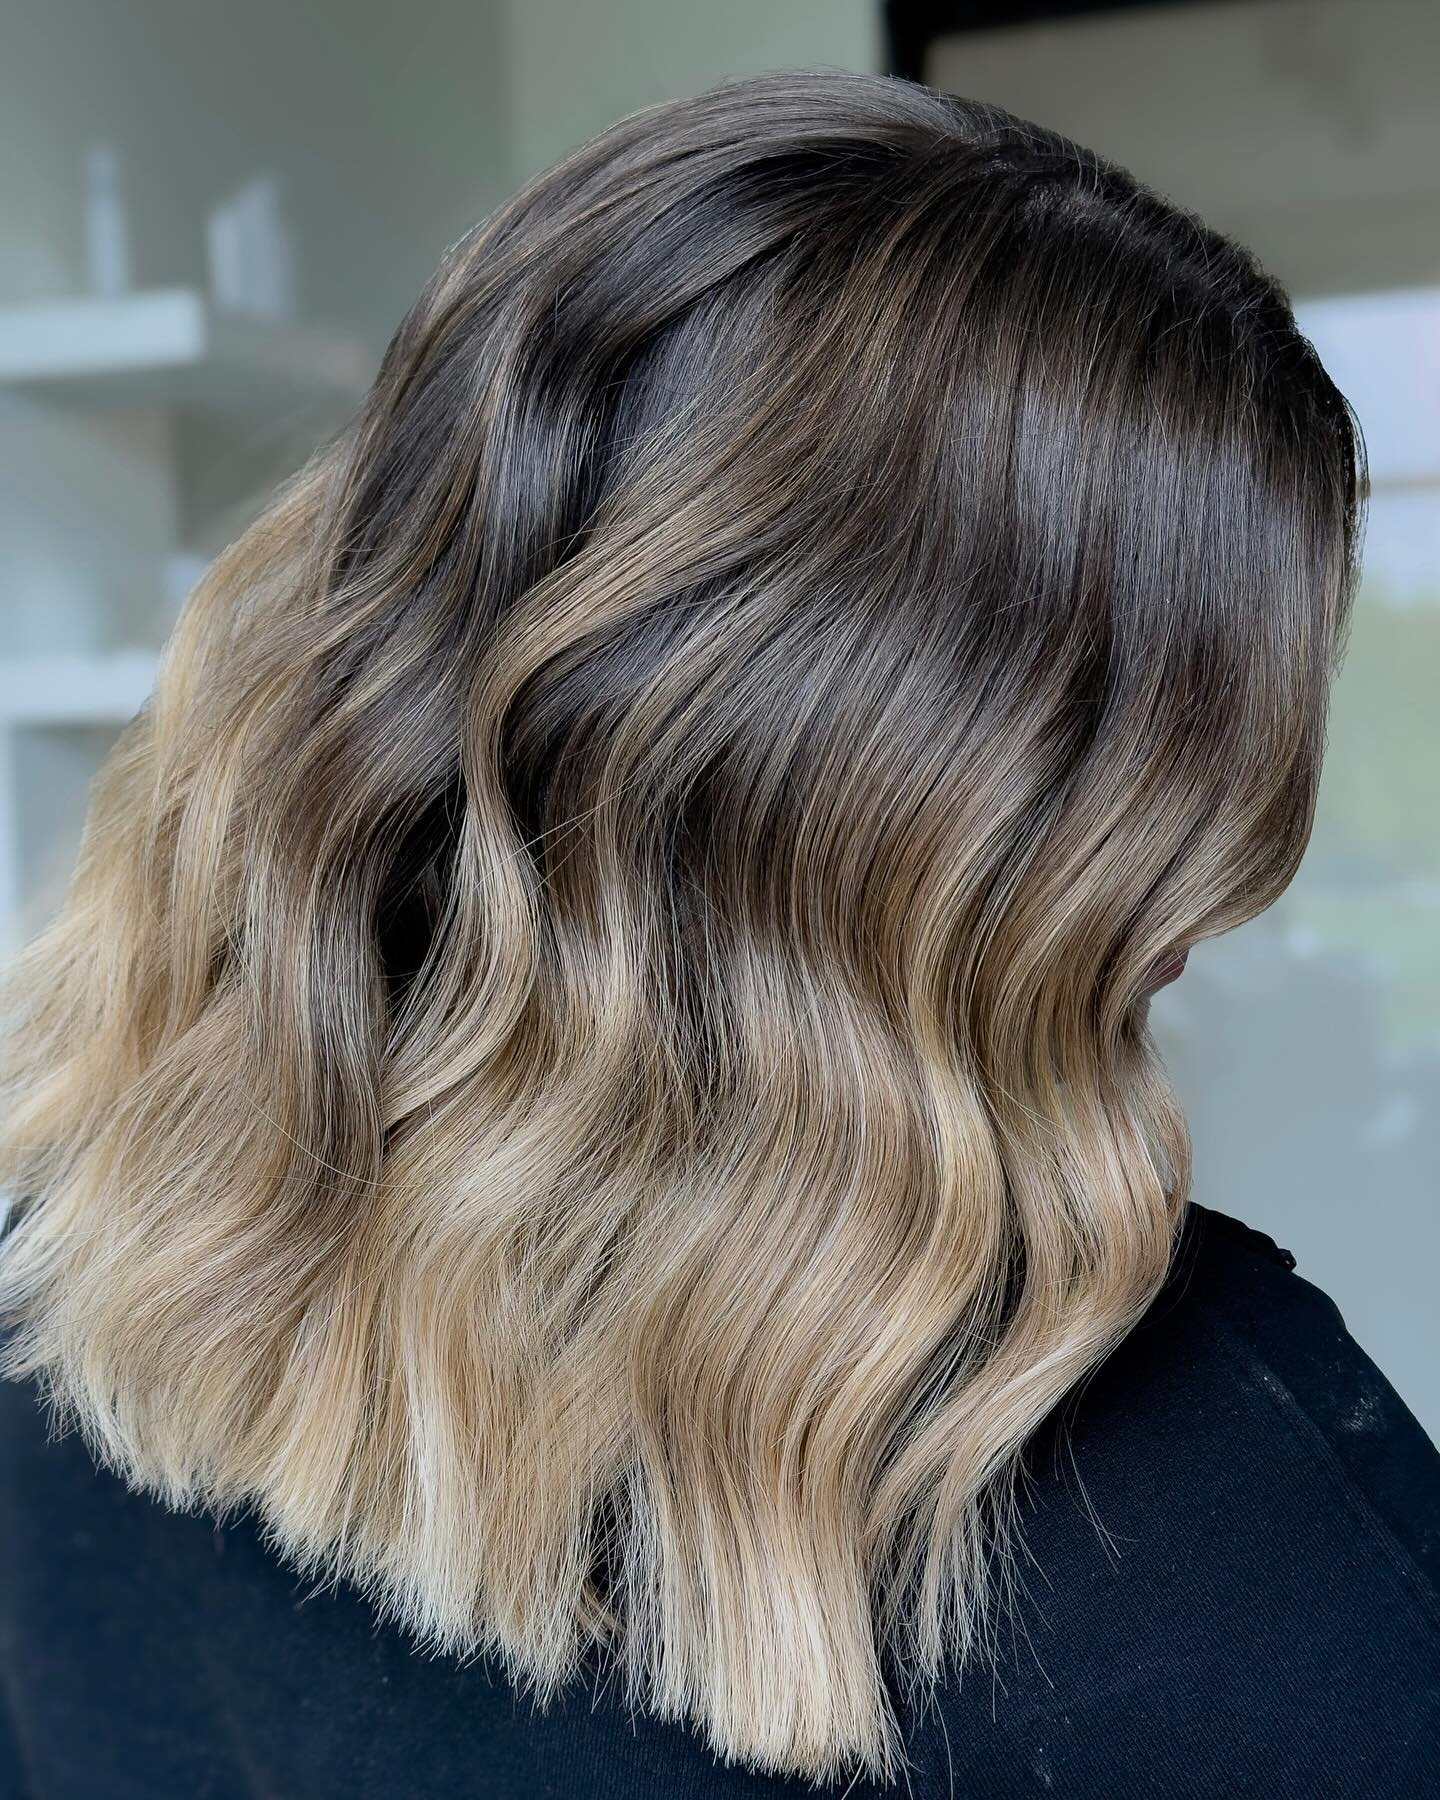 Are you dreaming of blonde hair but hate the high maintenance of highlights? 💭🤔
⠀⠀⠀⠀⠀⠀⠀⠀⠀
Let me unlock the secret of lived in color.  Lived in color gives you a soft, beautiful, and effortless beautiful look with minimal upkeep. Whether you are a 